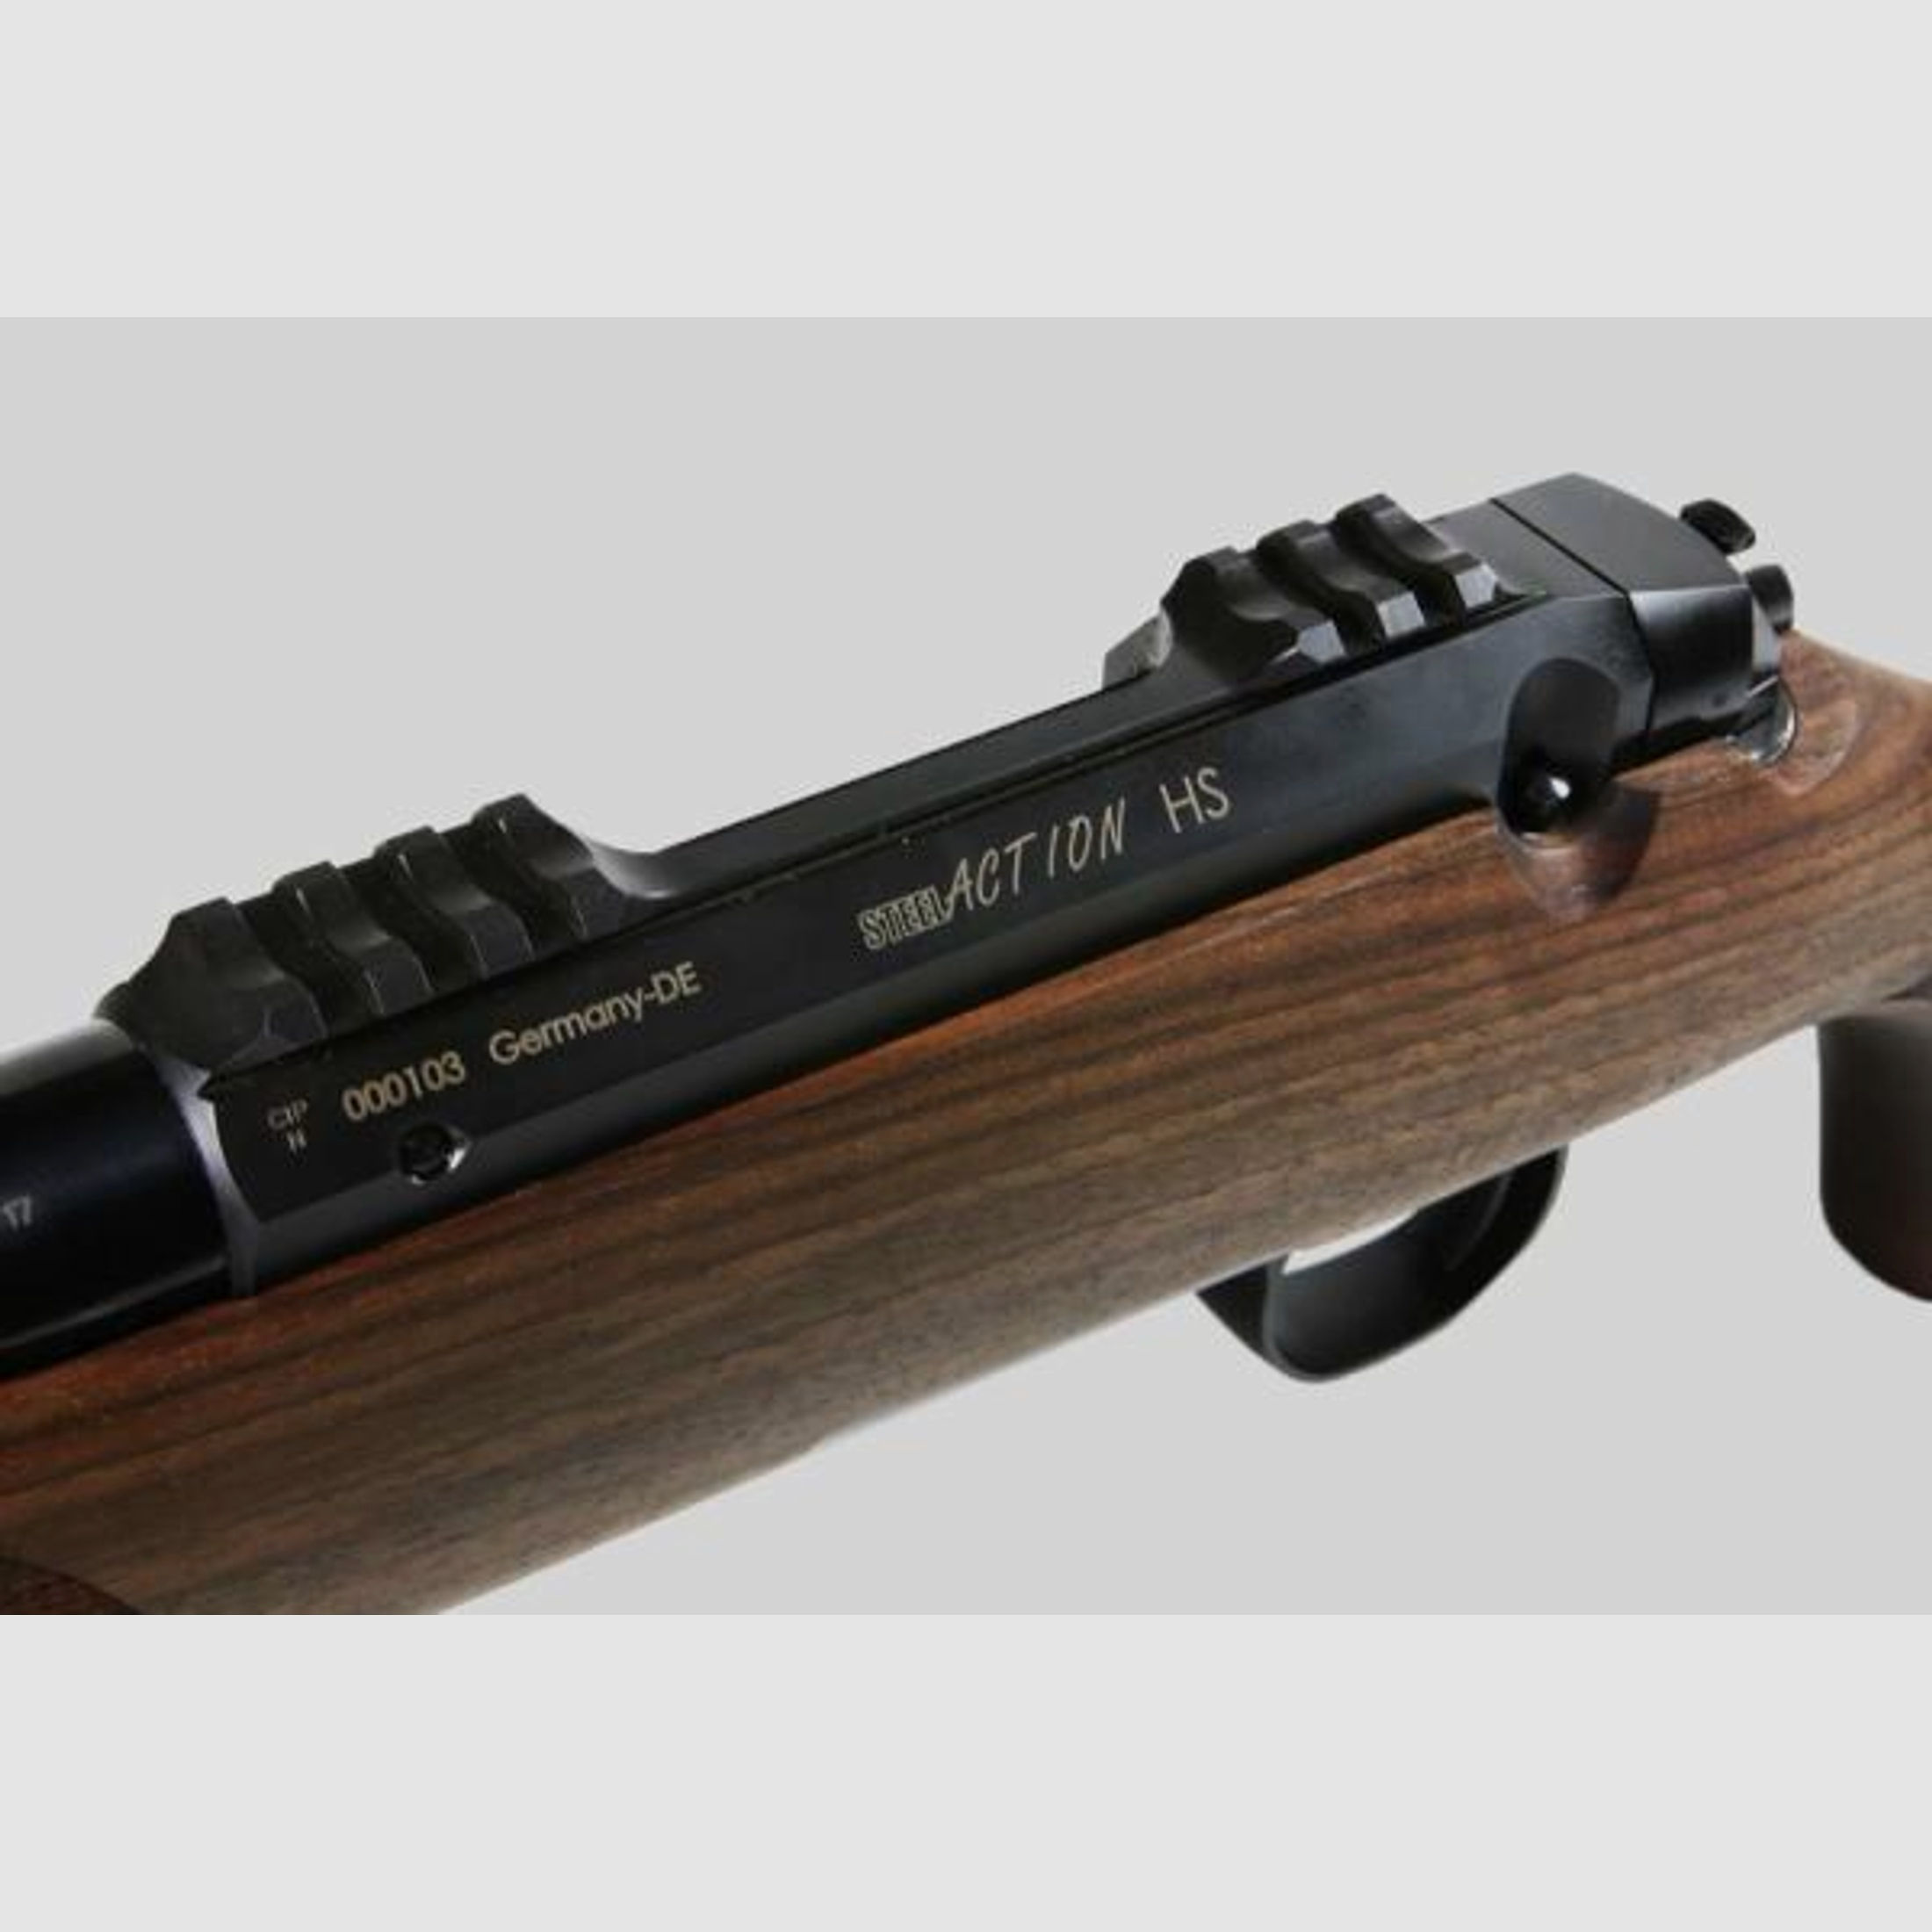 Steel Action Repetierbüchse Mod. Holz IV (HS) .308Win